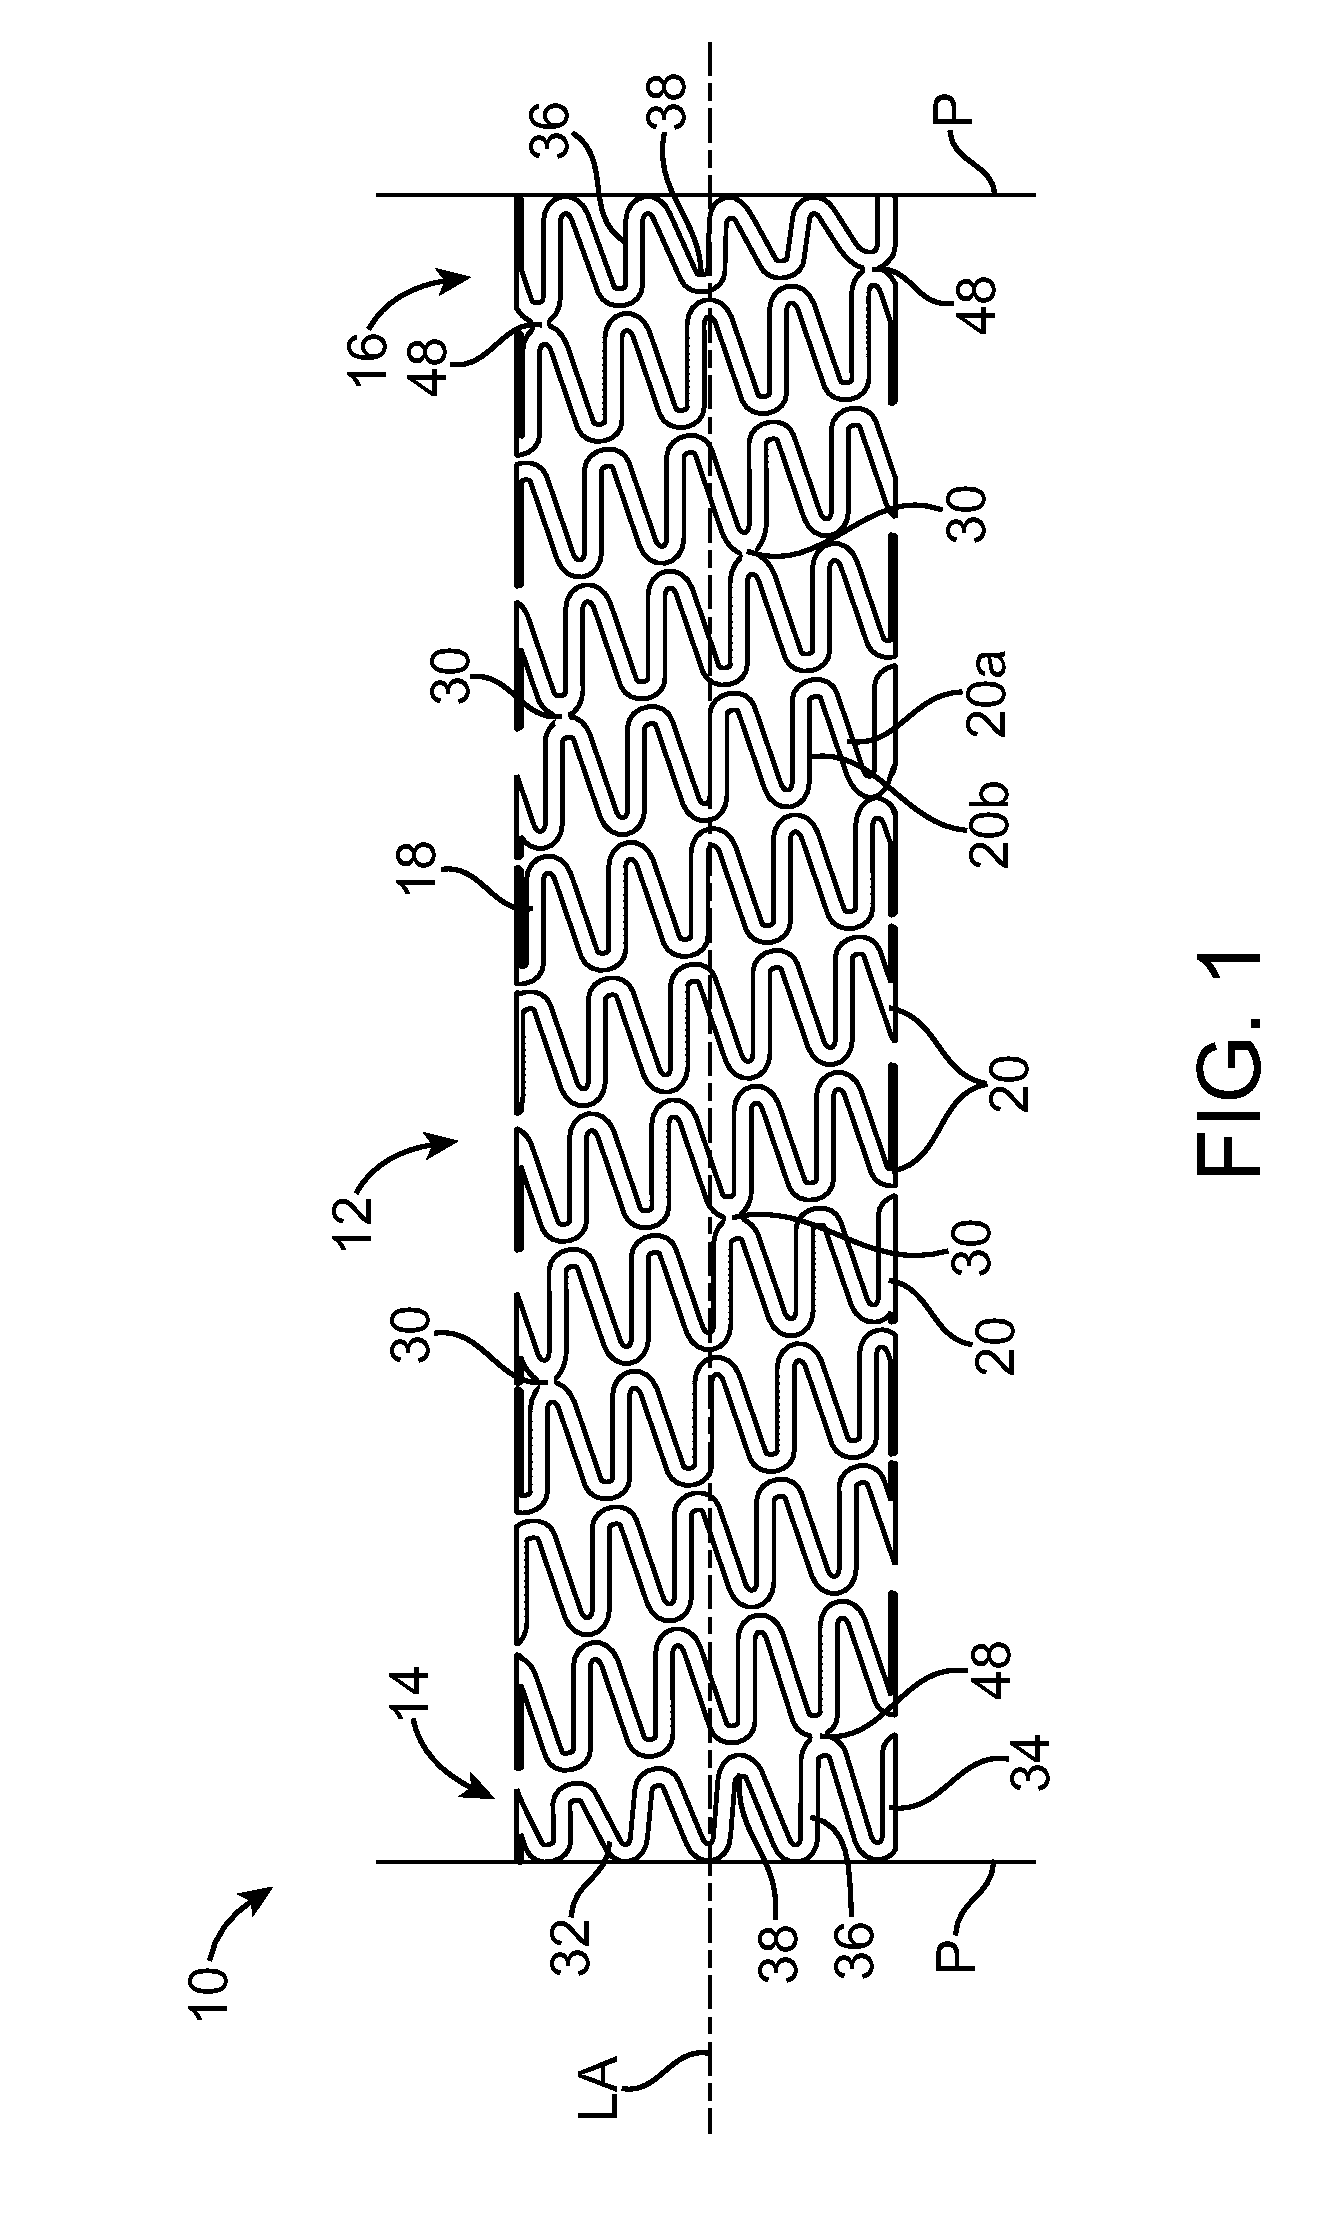 Stent With Improved Mechanical Properties